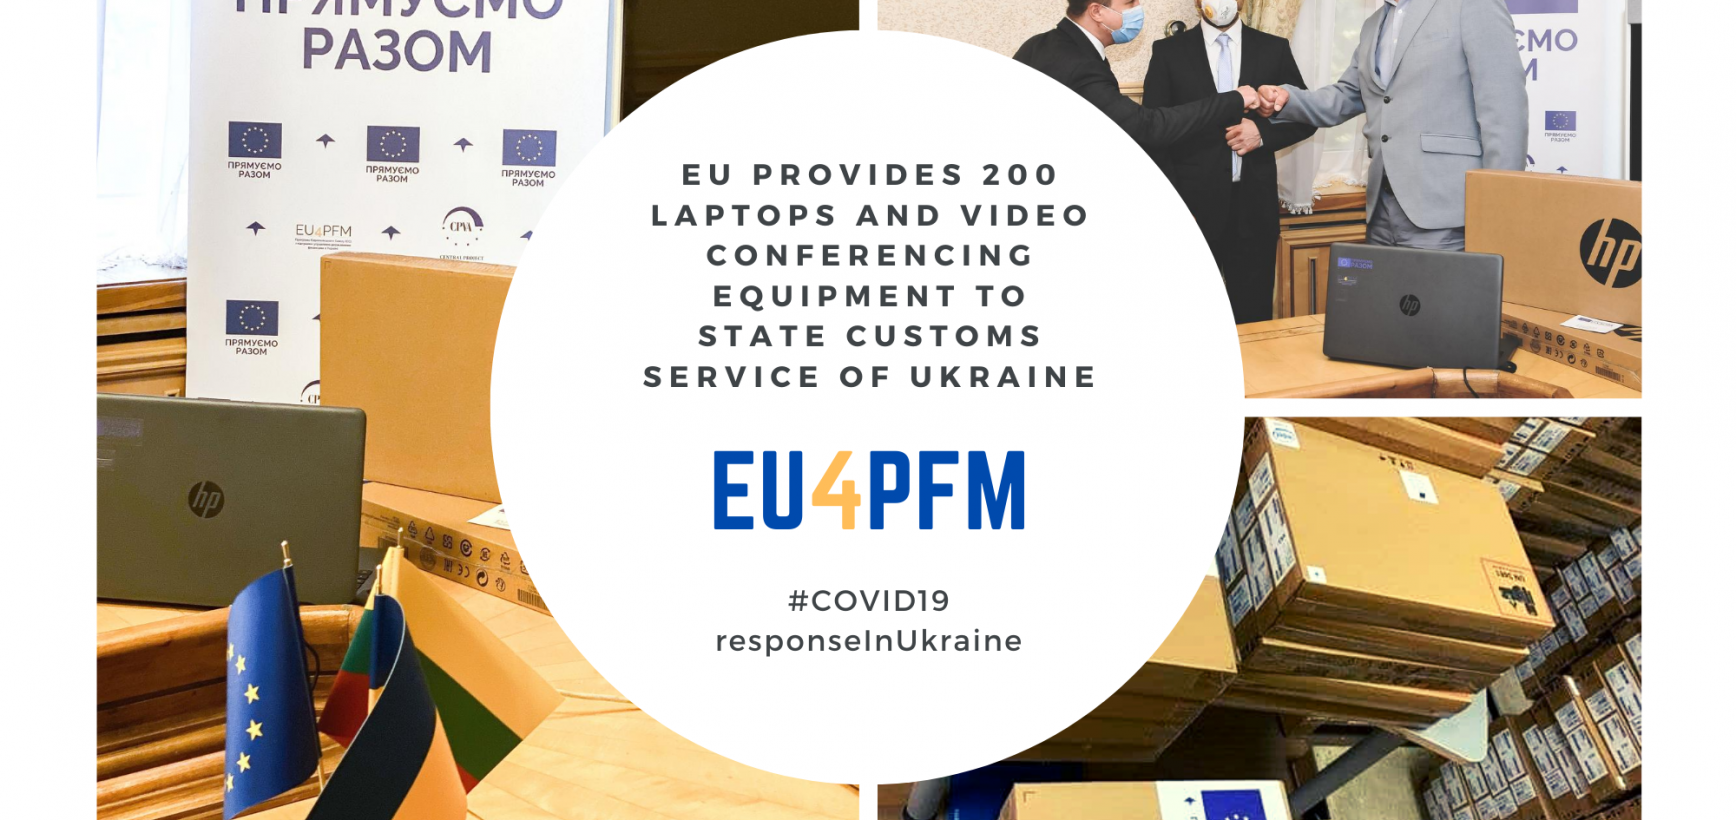 EU provides 200 laptops and video conferencing equipment to State Customs Service of Ukraine amid...